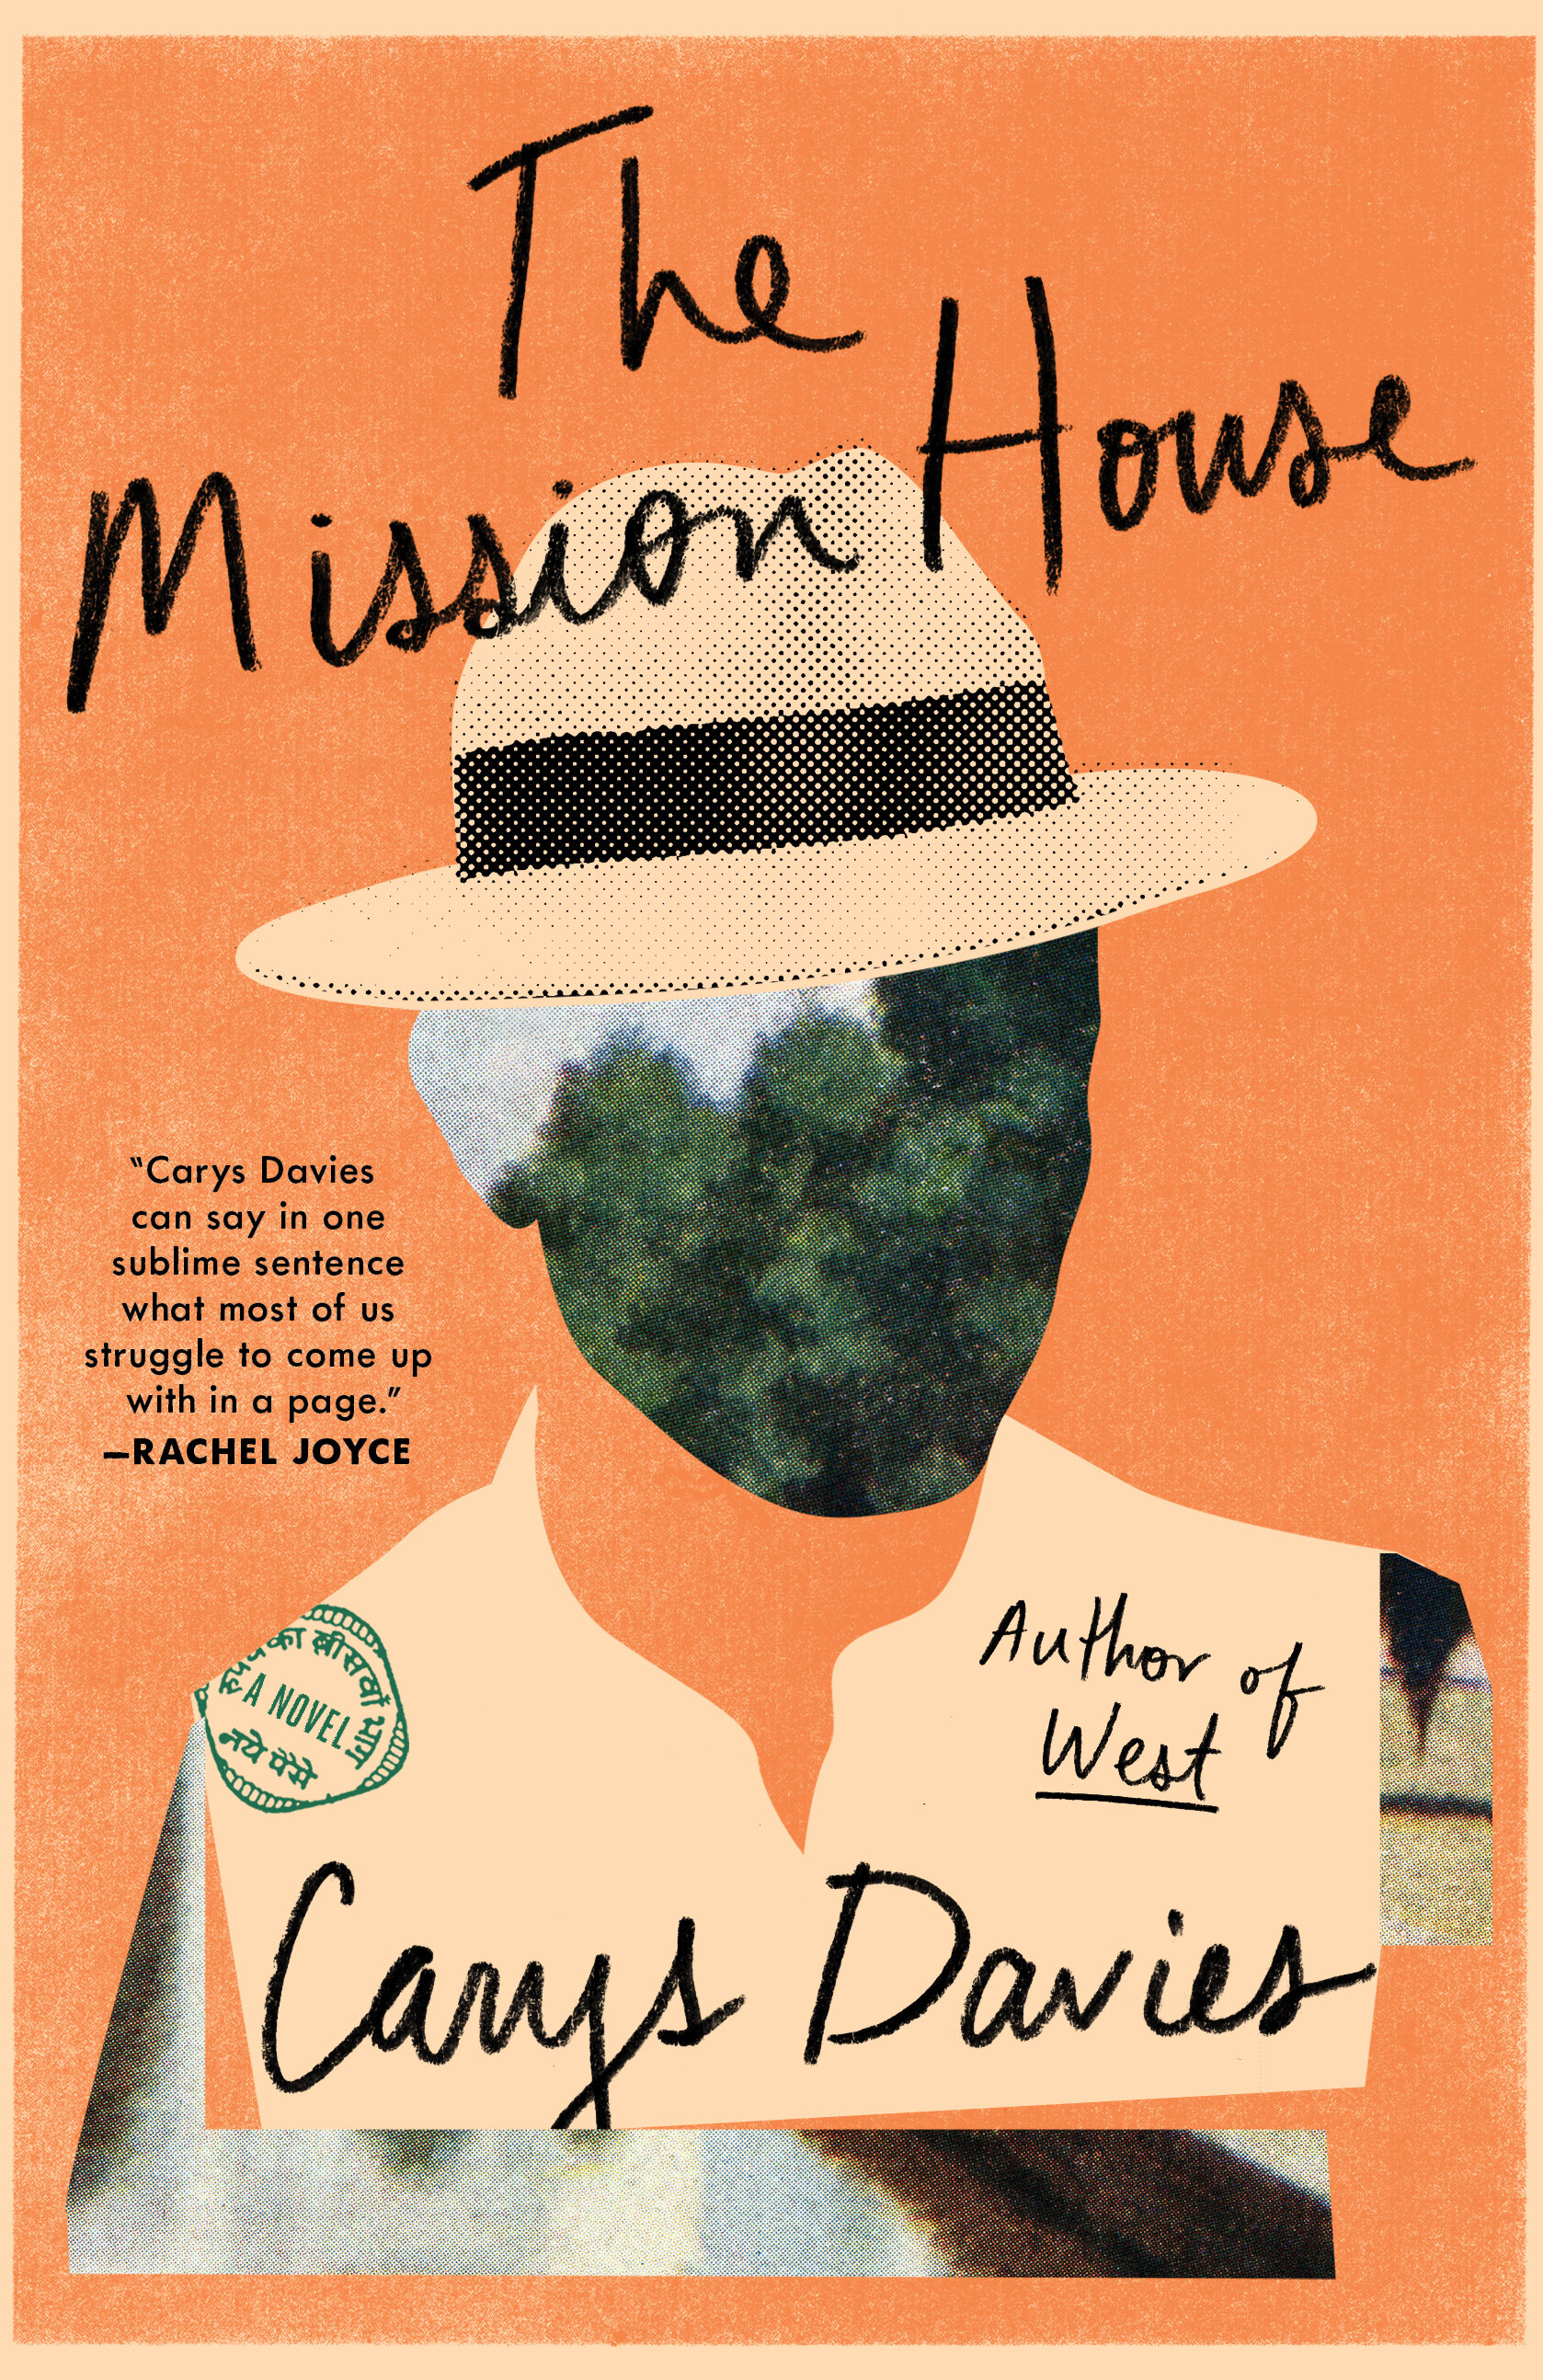 The Mission House - final cover.jpg